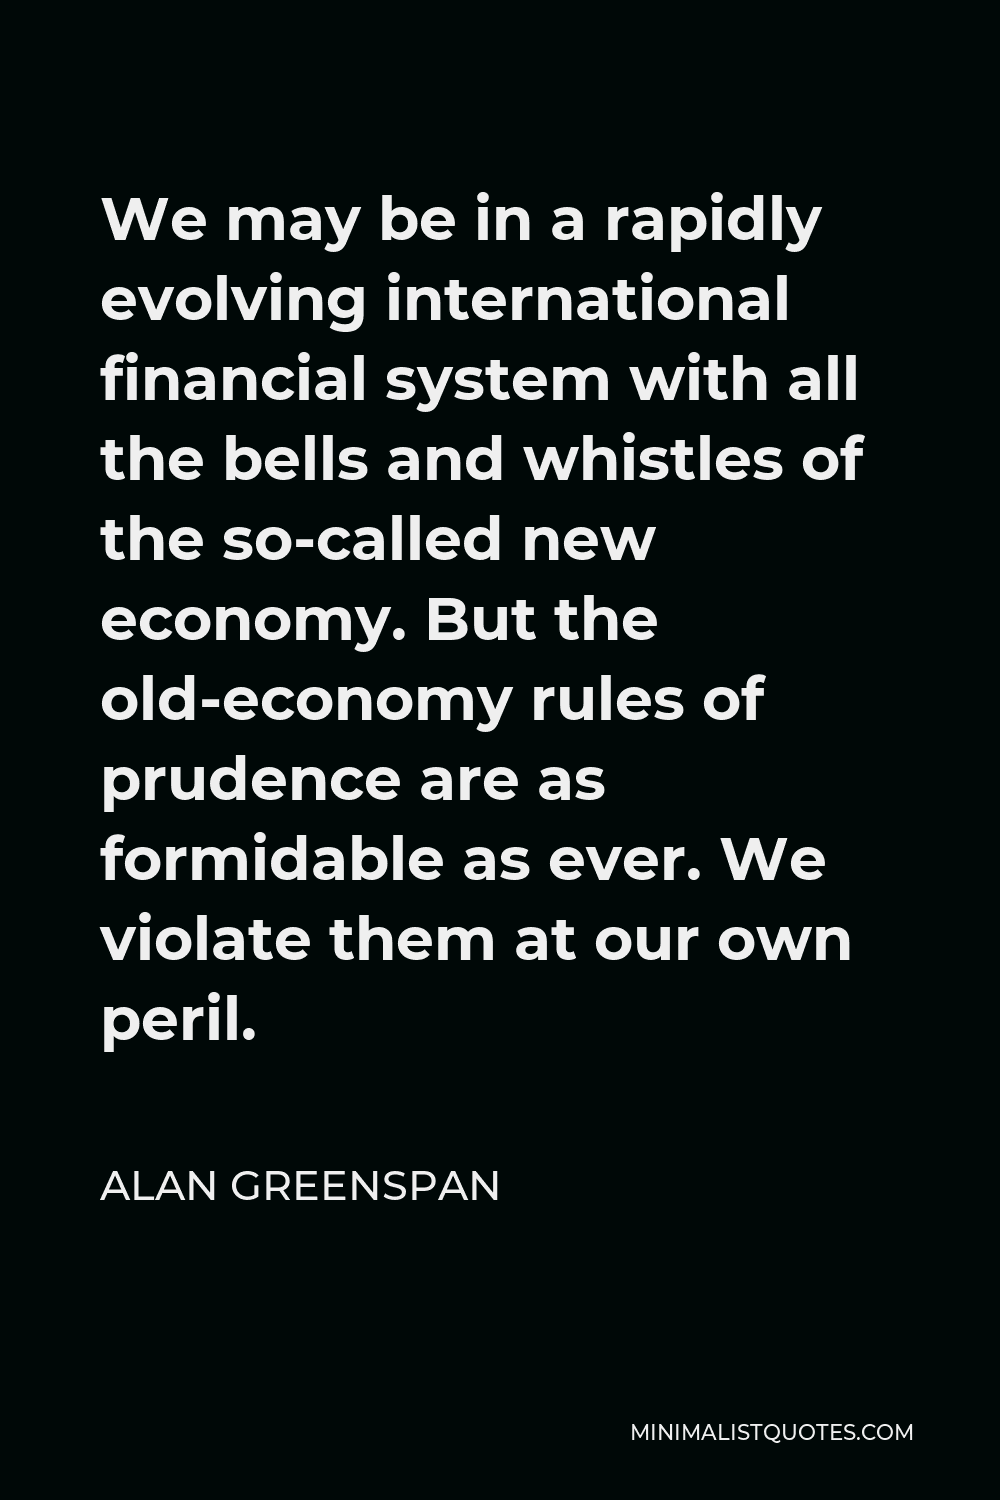 Alan Greenspan Quote - We may be in a rapidly evolving international financial system with all the bells and whistles of the so-called new economy. But the old-economy rules of prudence are as formidable as ever. We violate them at our own peril.